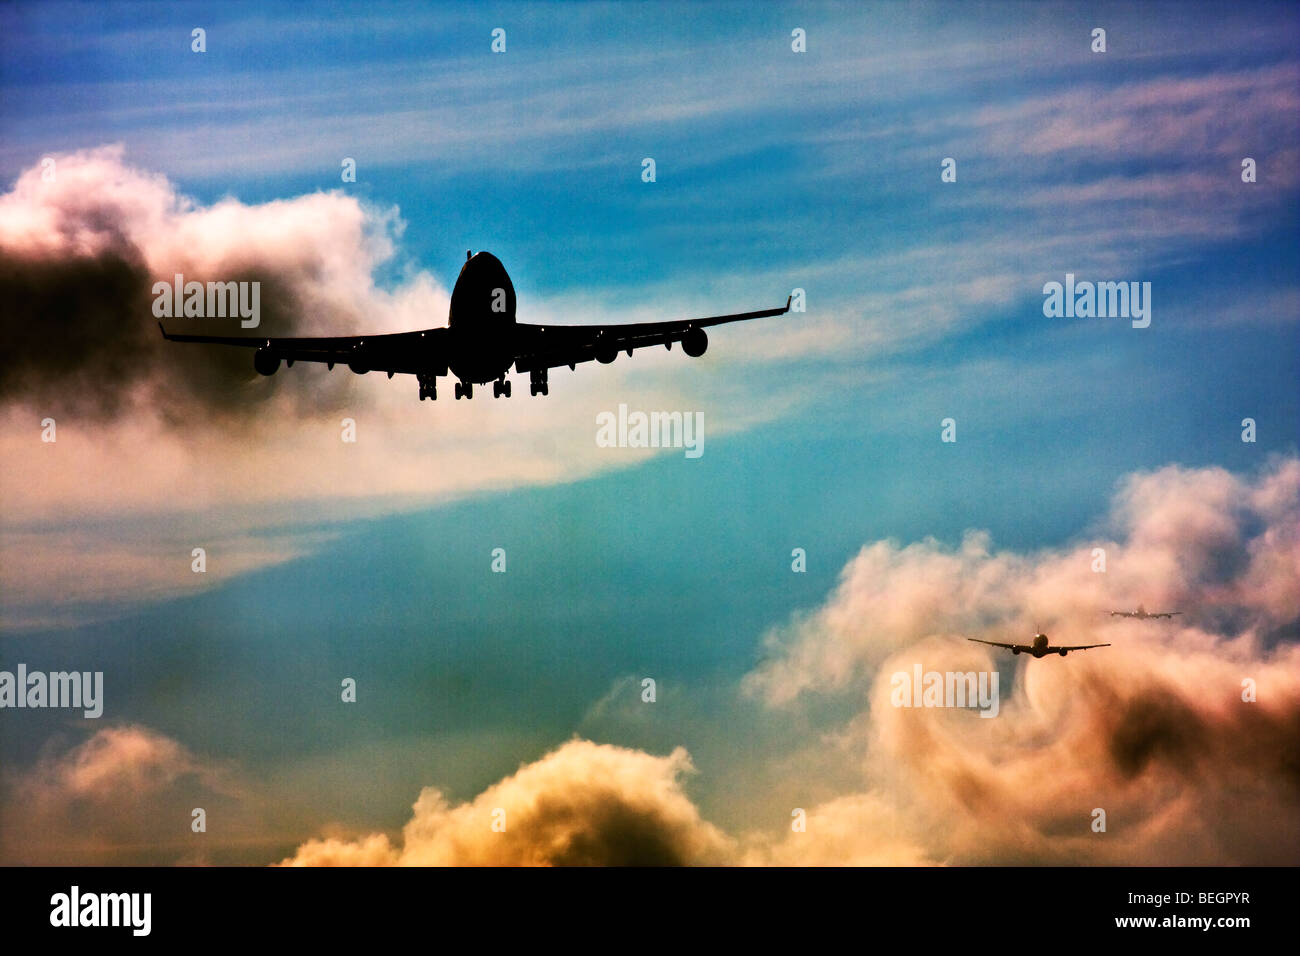 Wake turbulence forms behind aircrafts as they passes through the clouds when descending for landing. Stock Photo